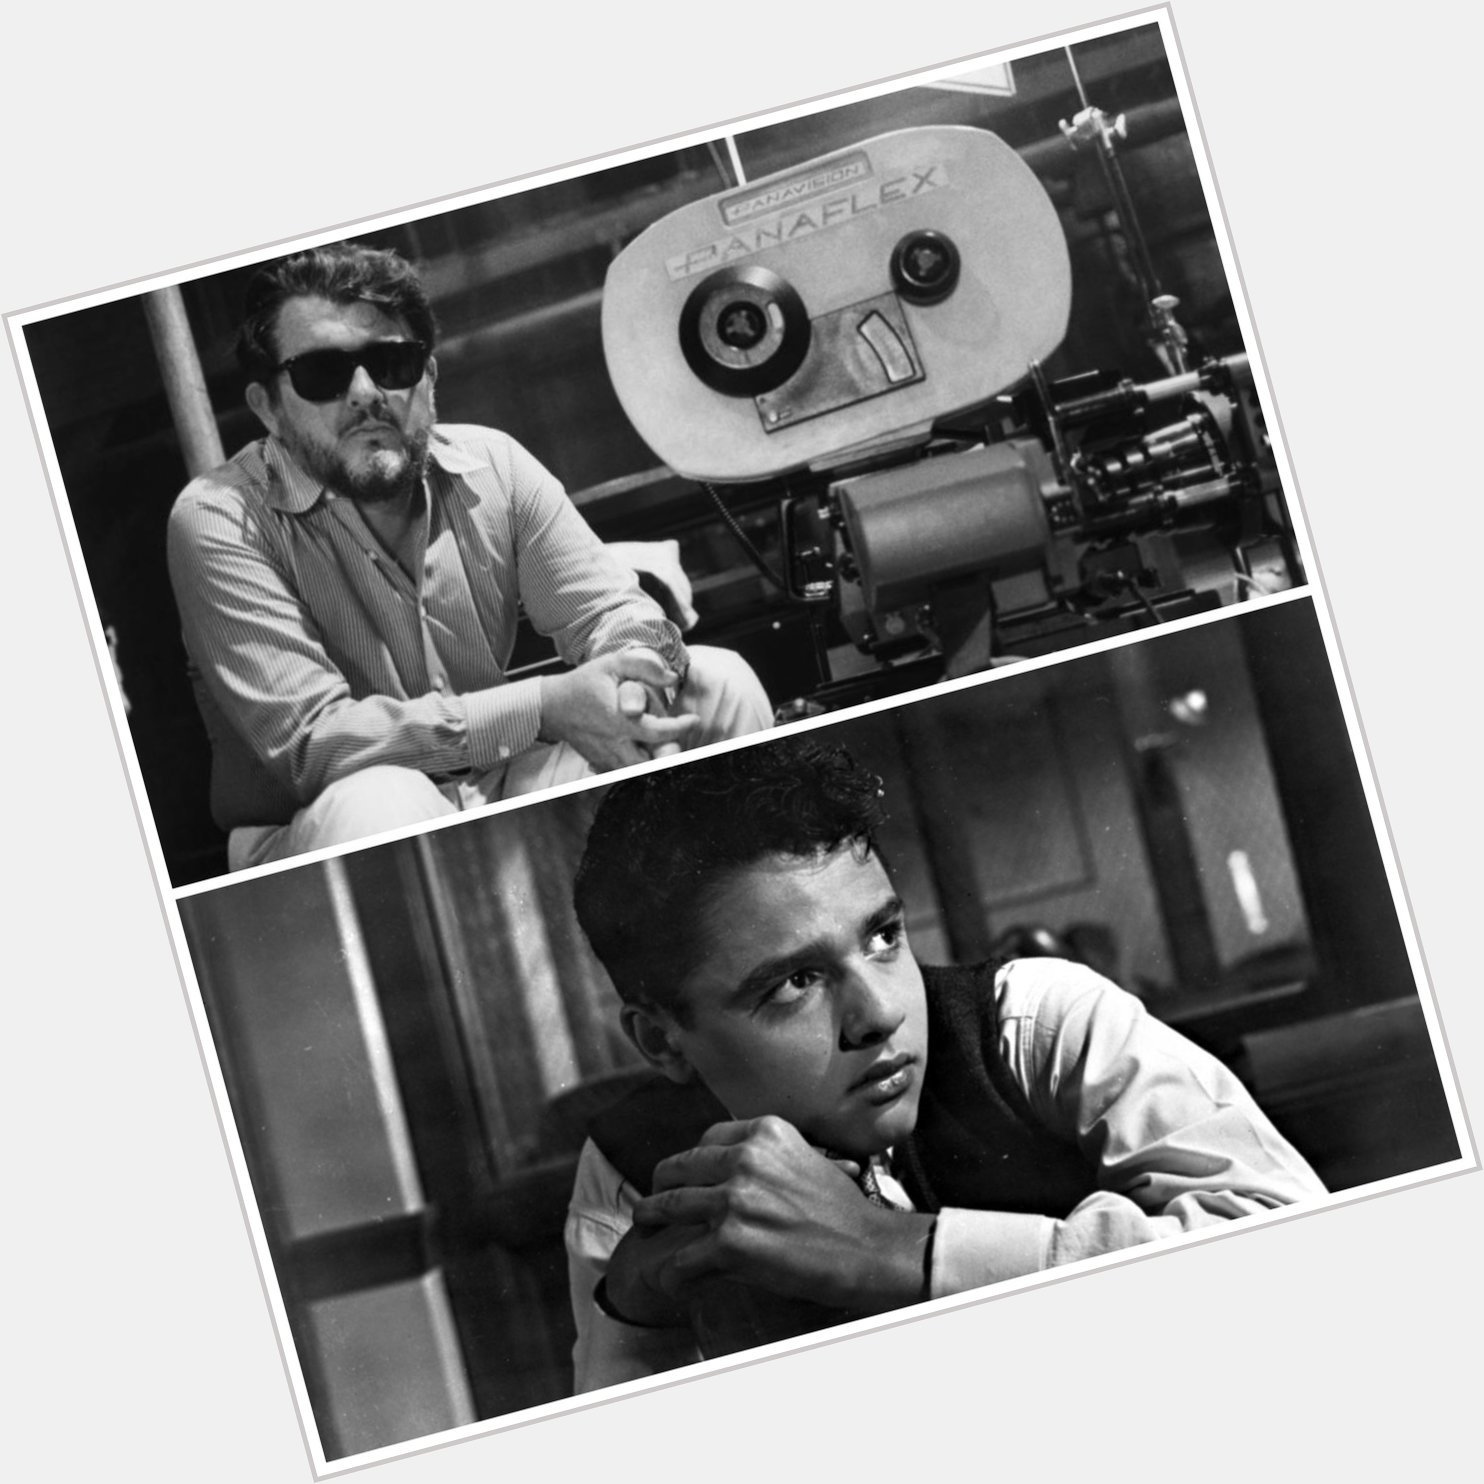 Wishing a Happy Birthday to filmmaker Walter Hill and remembering Sal Mineo on his Birthday. 